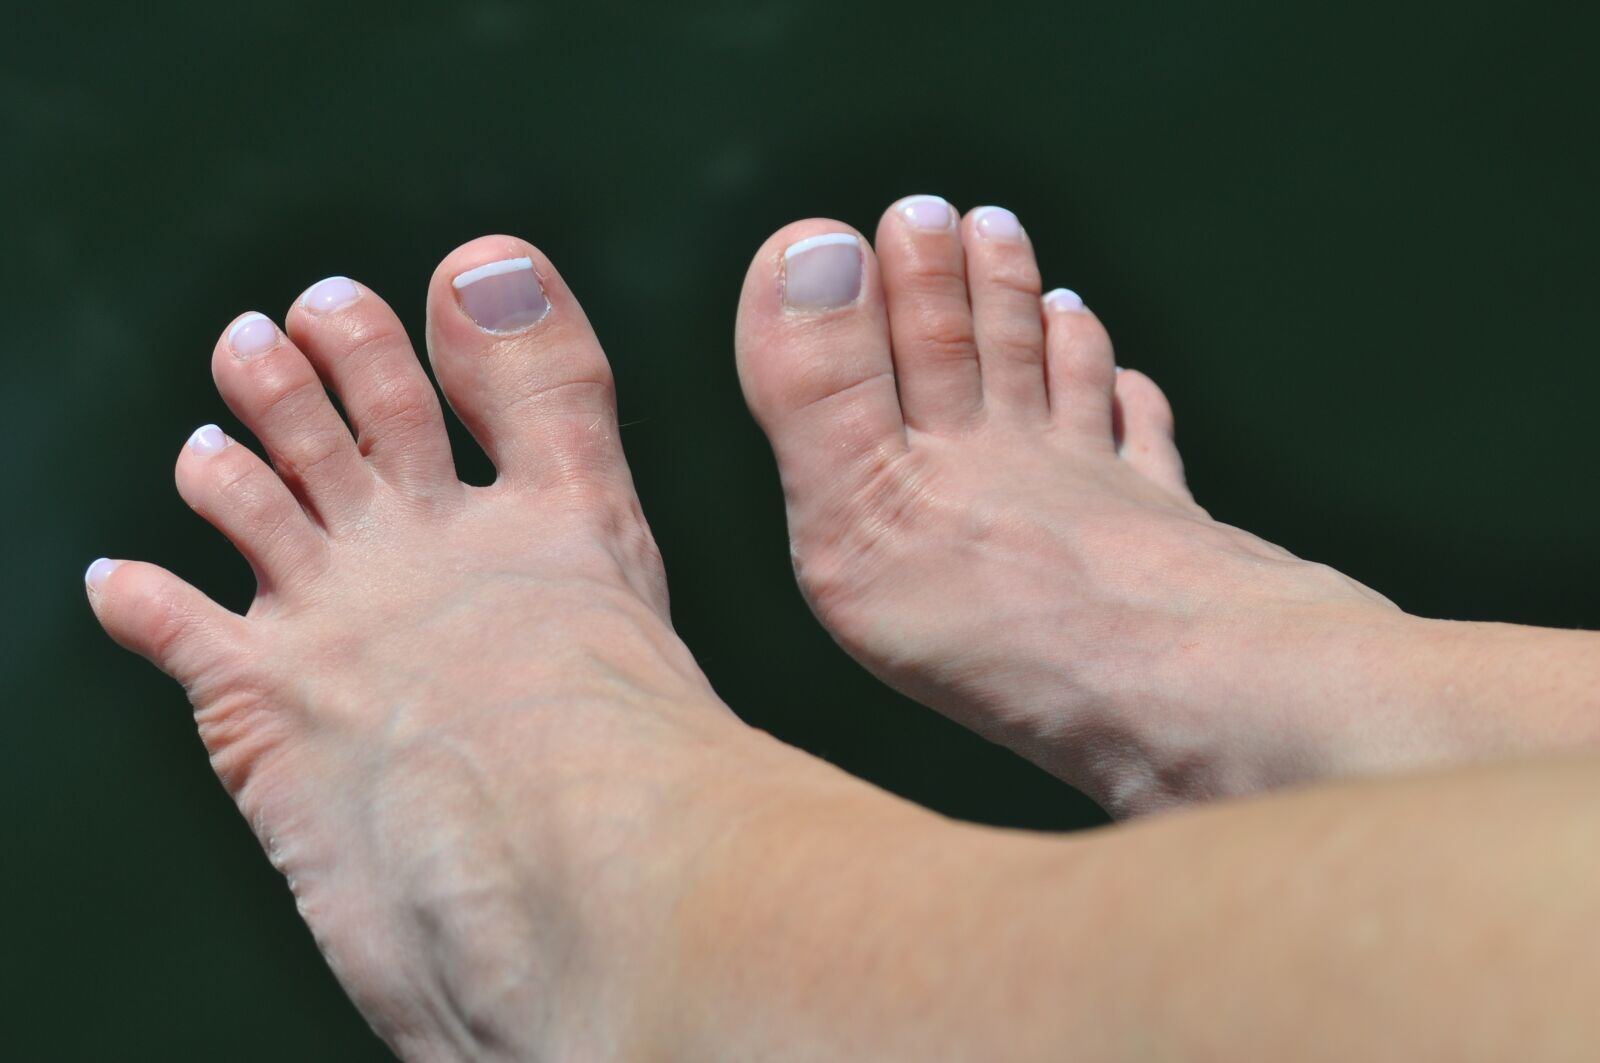 Nikon D90 sample photo. The rate of, feet photography